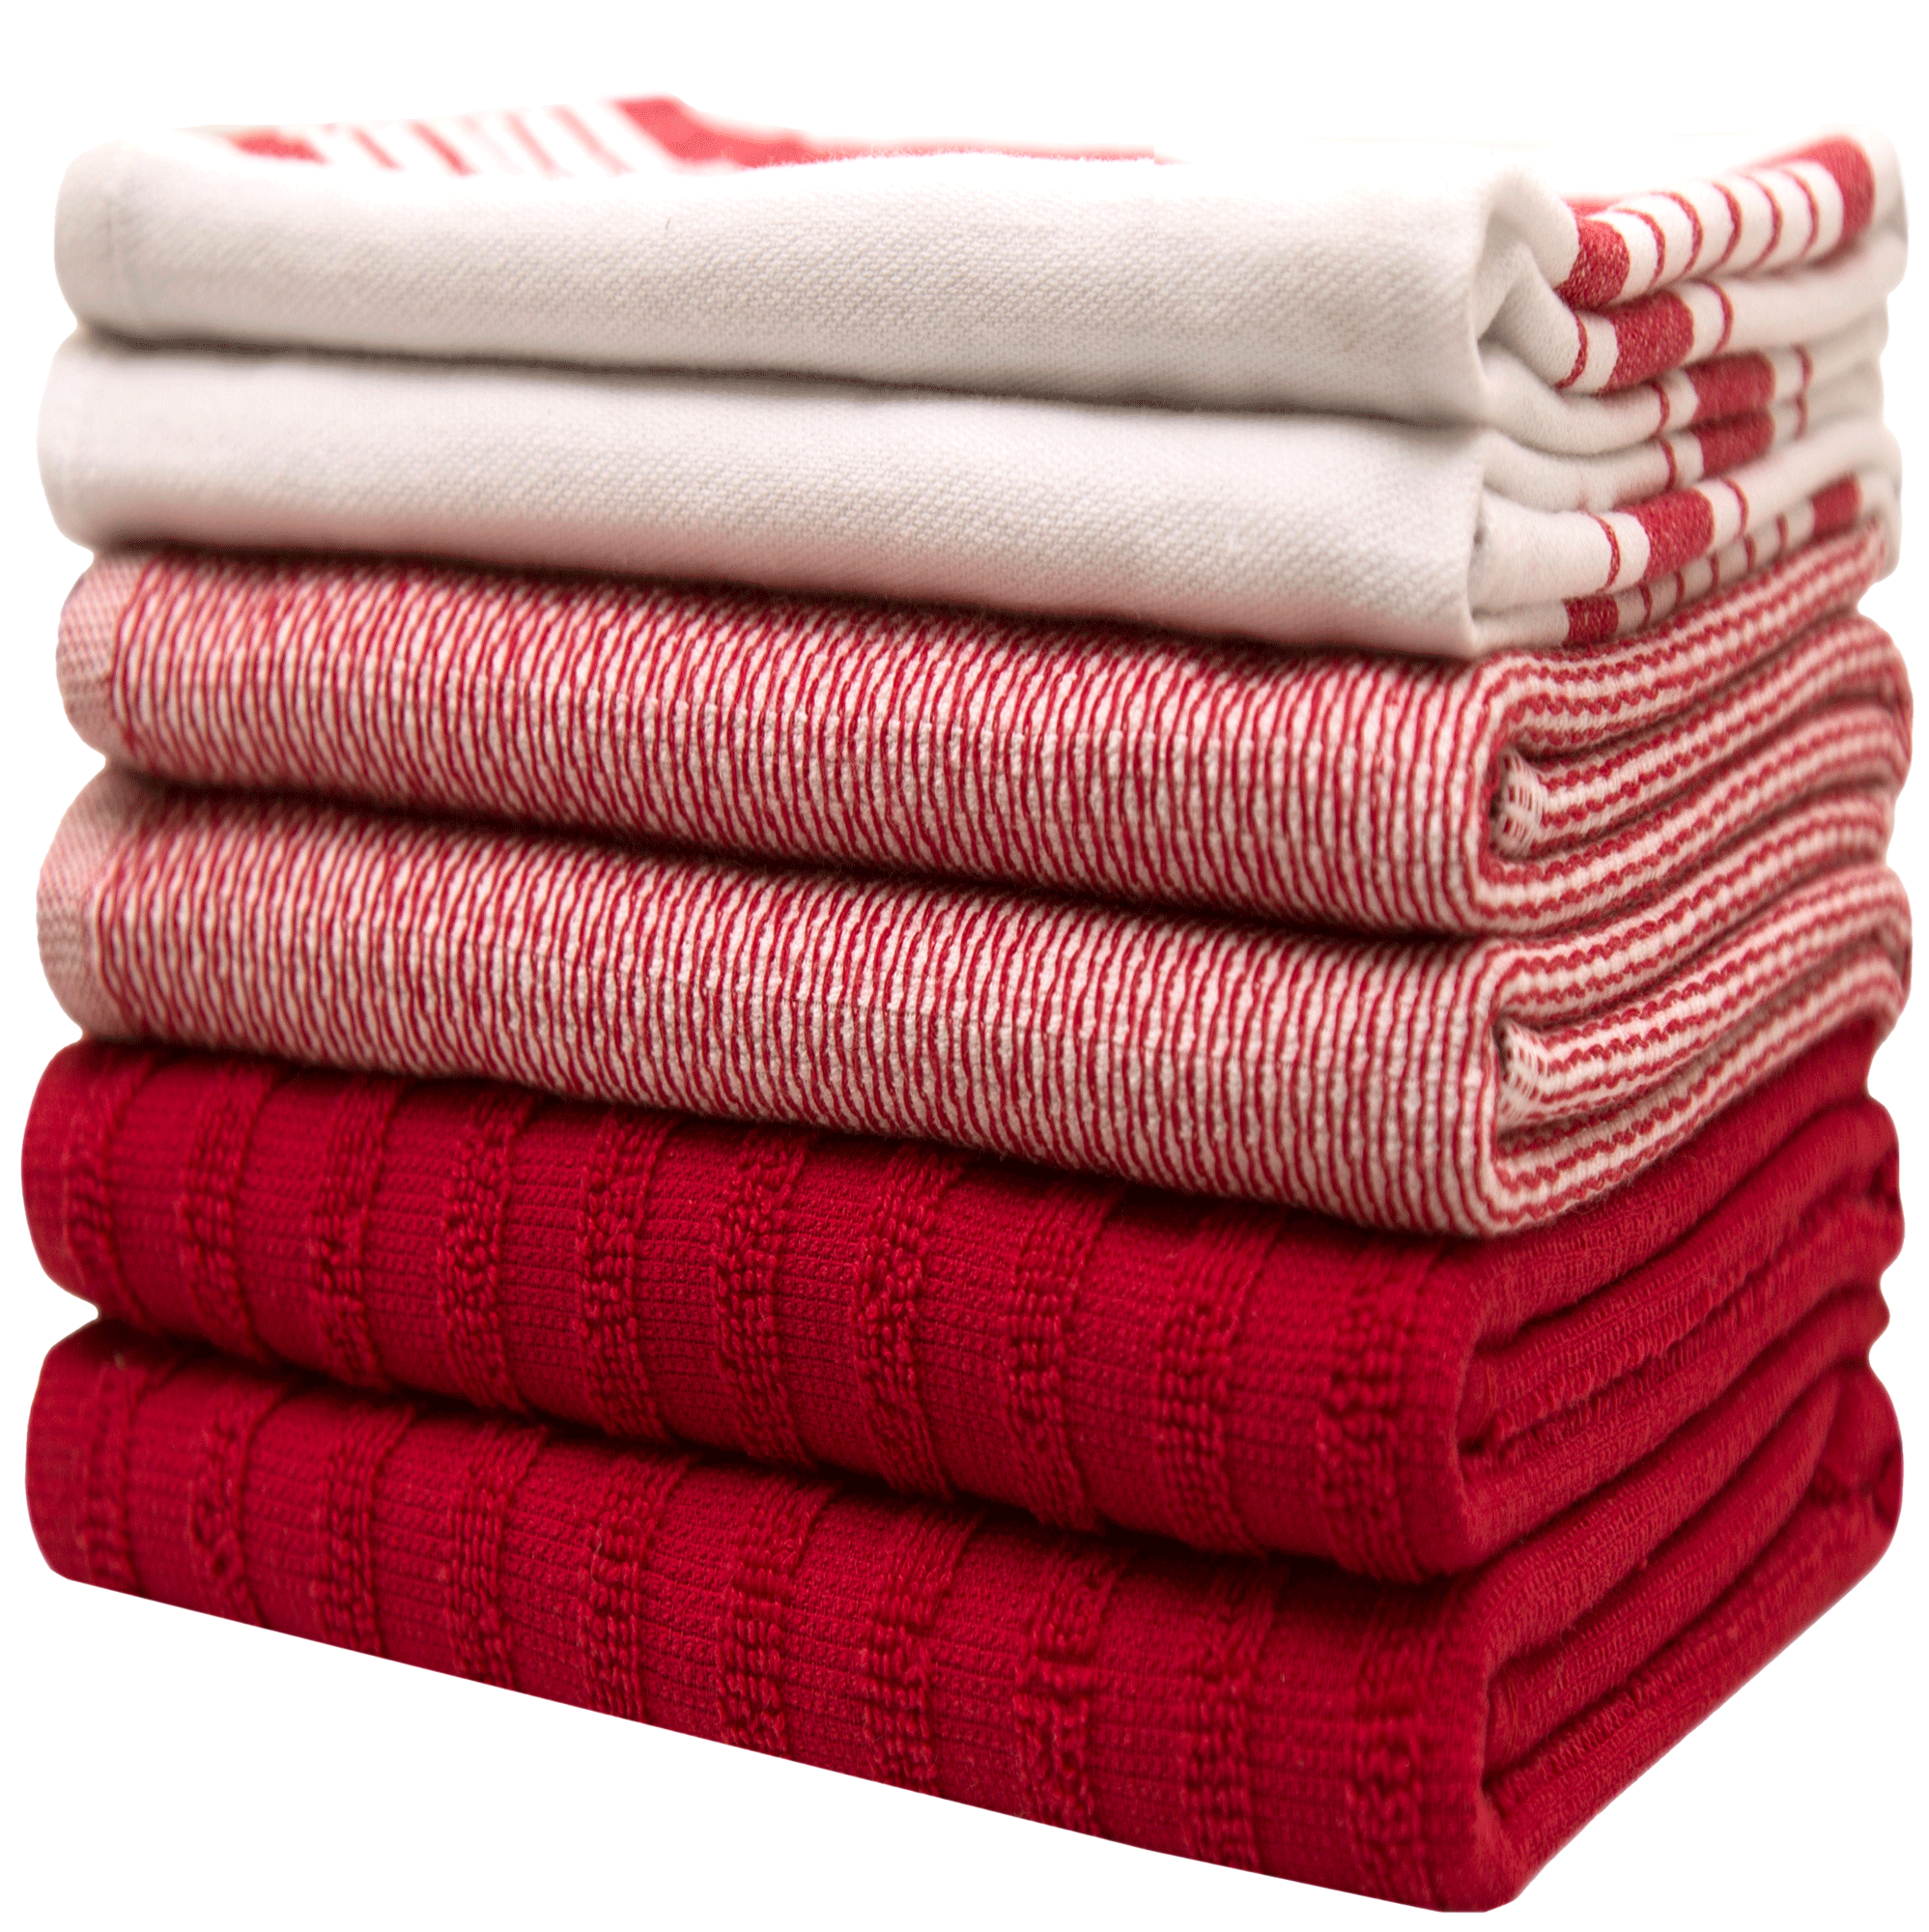 Premium Weave Yarn Dyed Kitchen Towels, Cotton, 16 x 26 in, Five